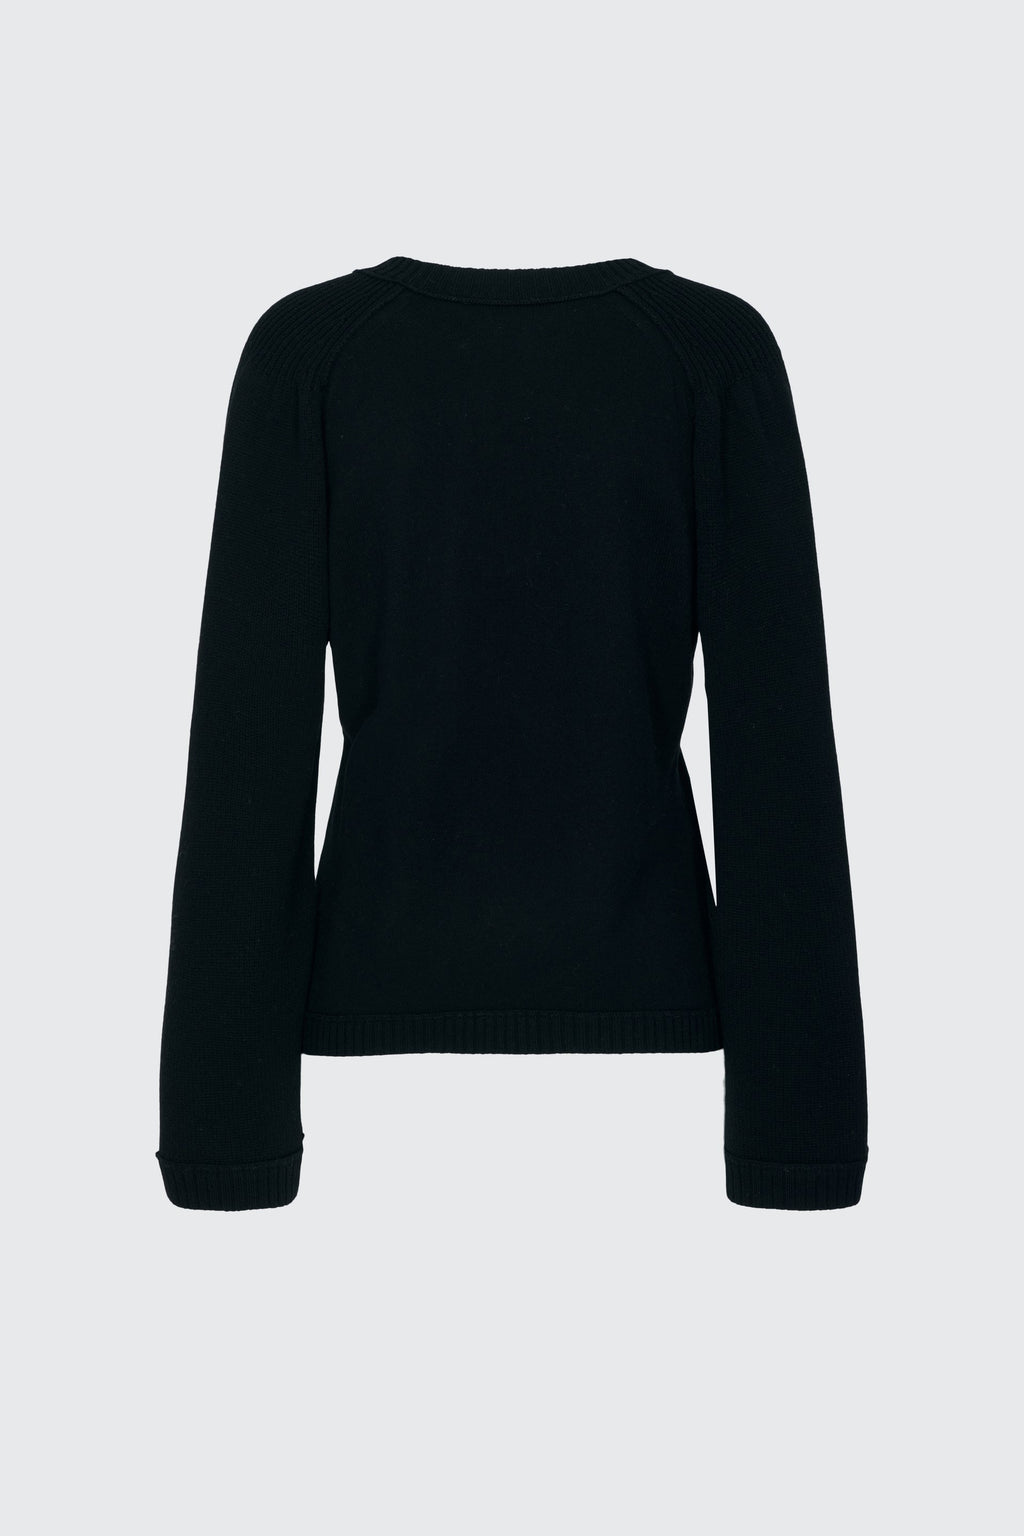 Dorothee Schumacher-OUTLET-SALE-SMOOTH SILHOUETTES pullover--ARCHIVIST